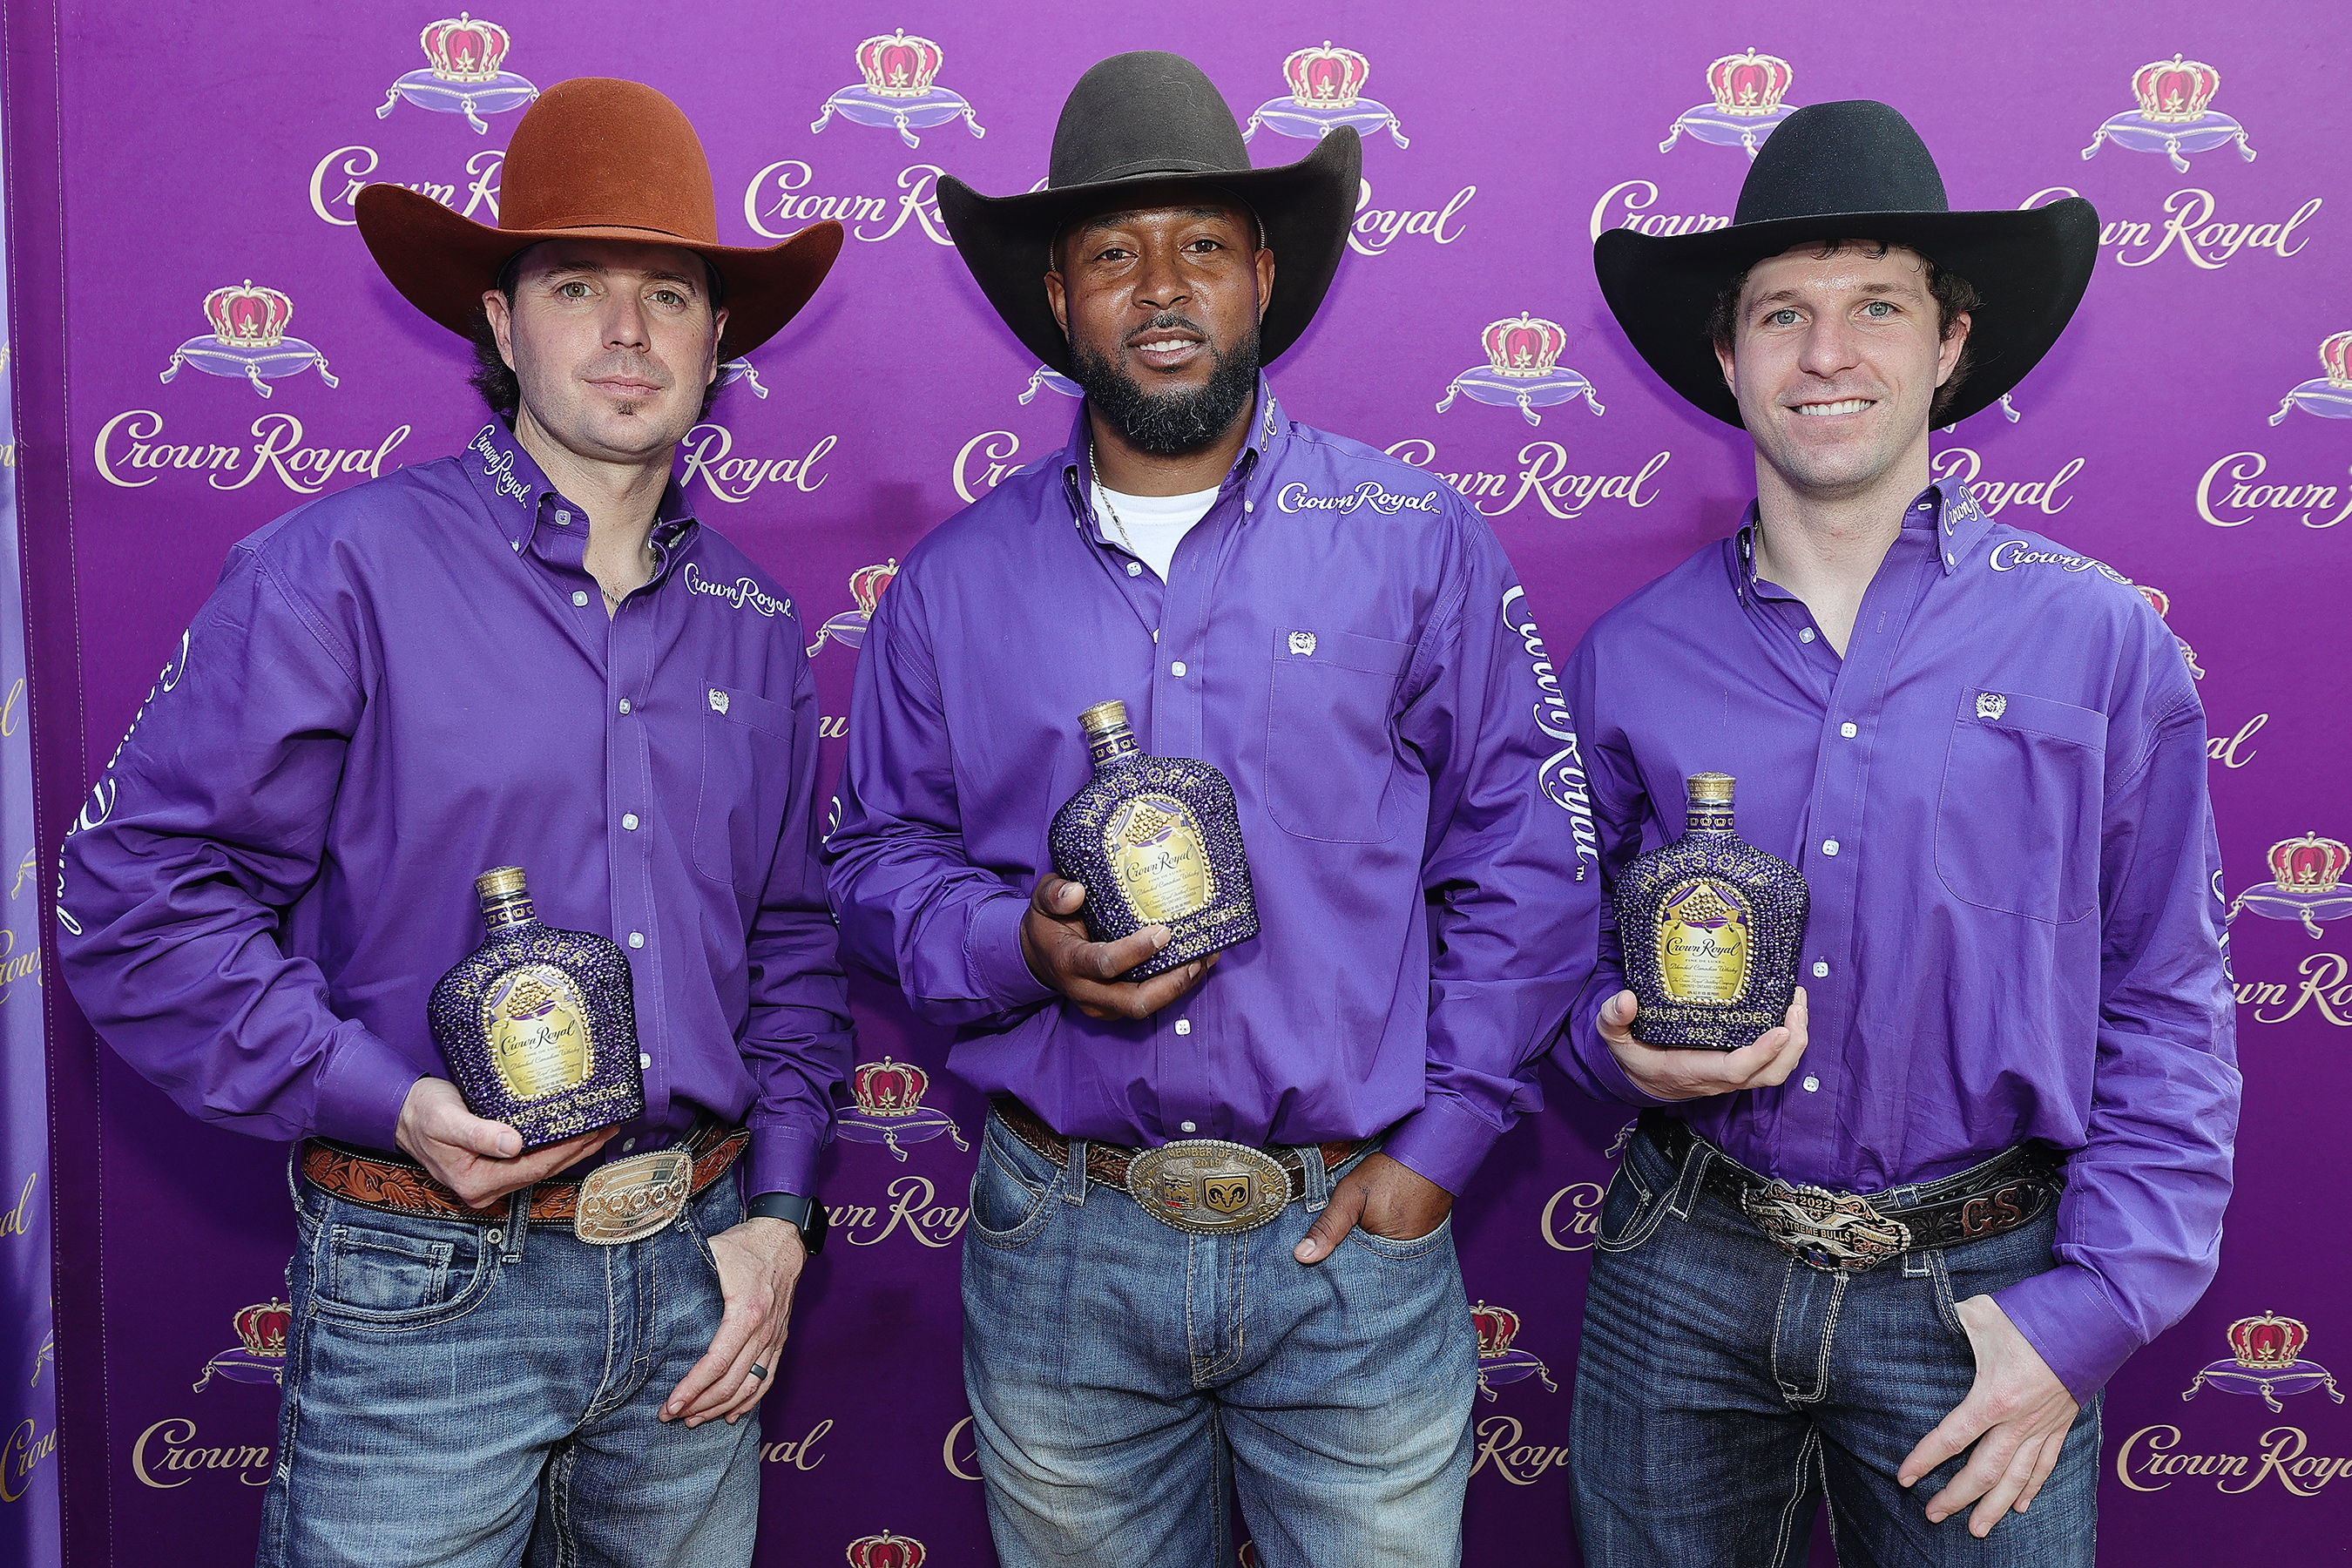 Crown Royal Celebrates The Local Rodeo Community and Champions Its Royal Riders at Houston Rodeo